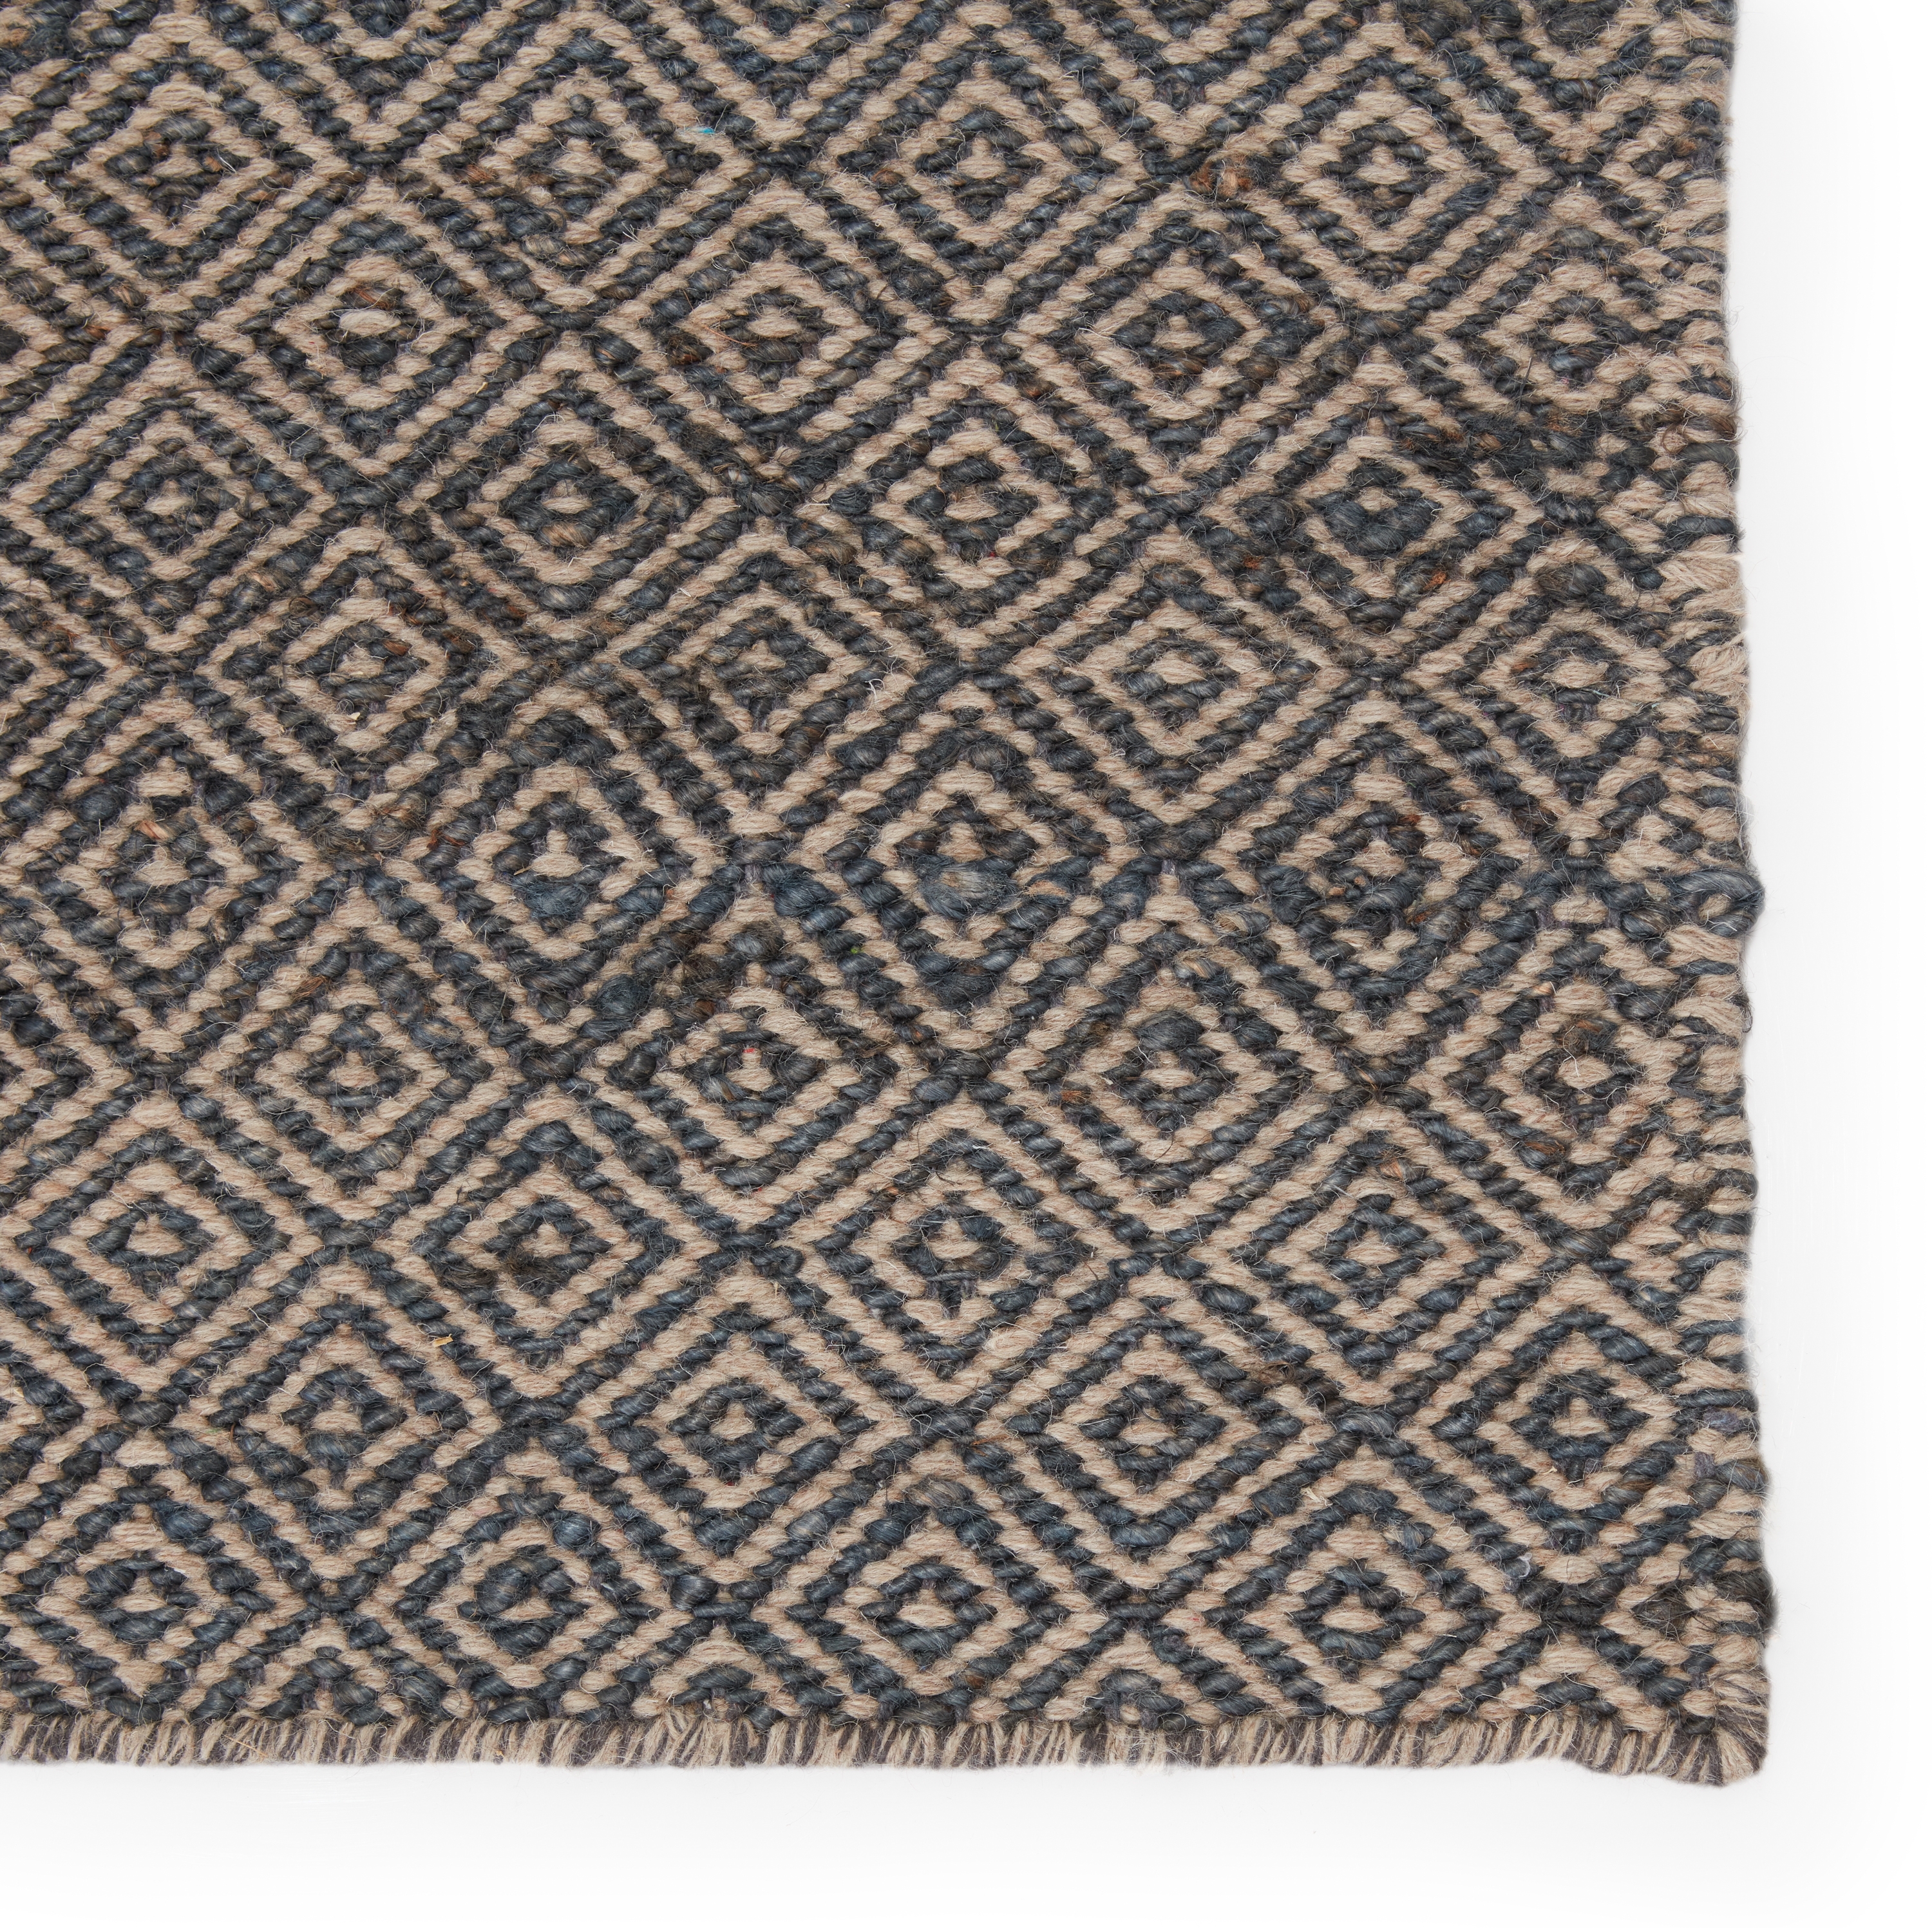 Wales Natural Geometric Gray/ White Area Rug (8' X 10') - Image 3